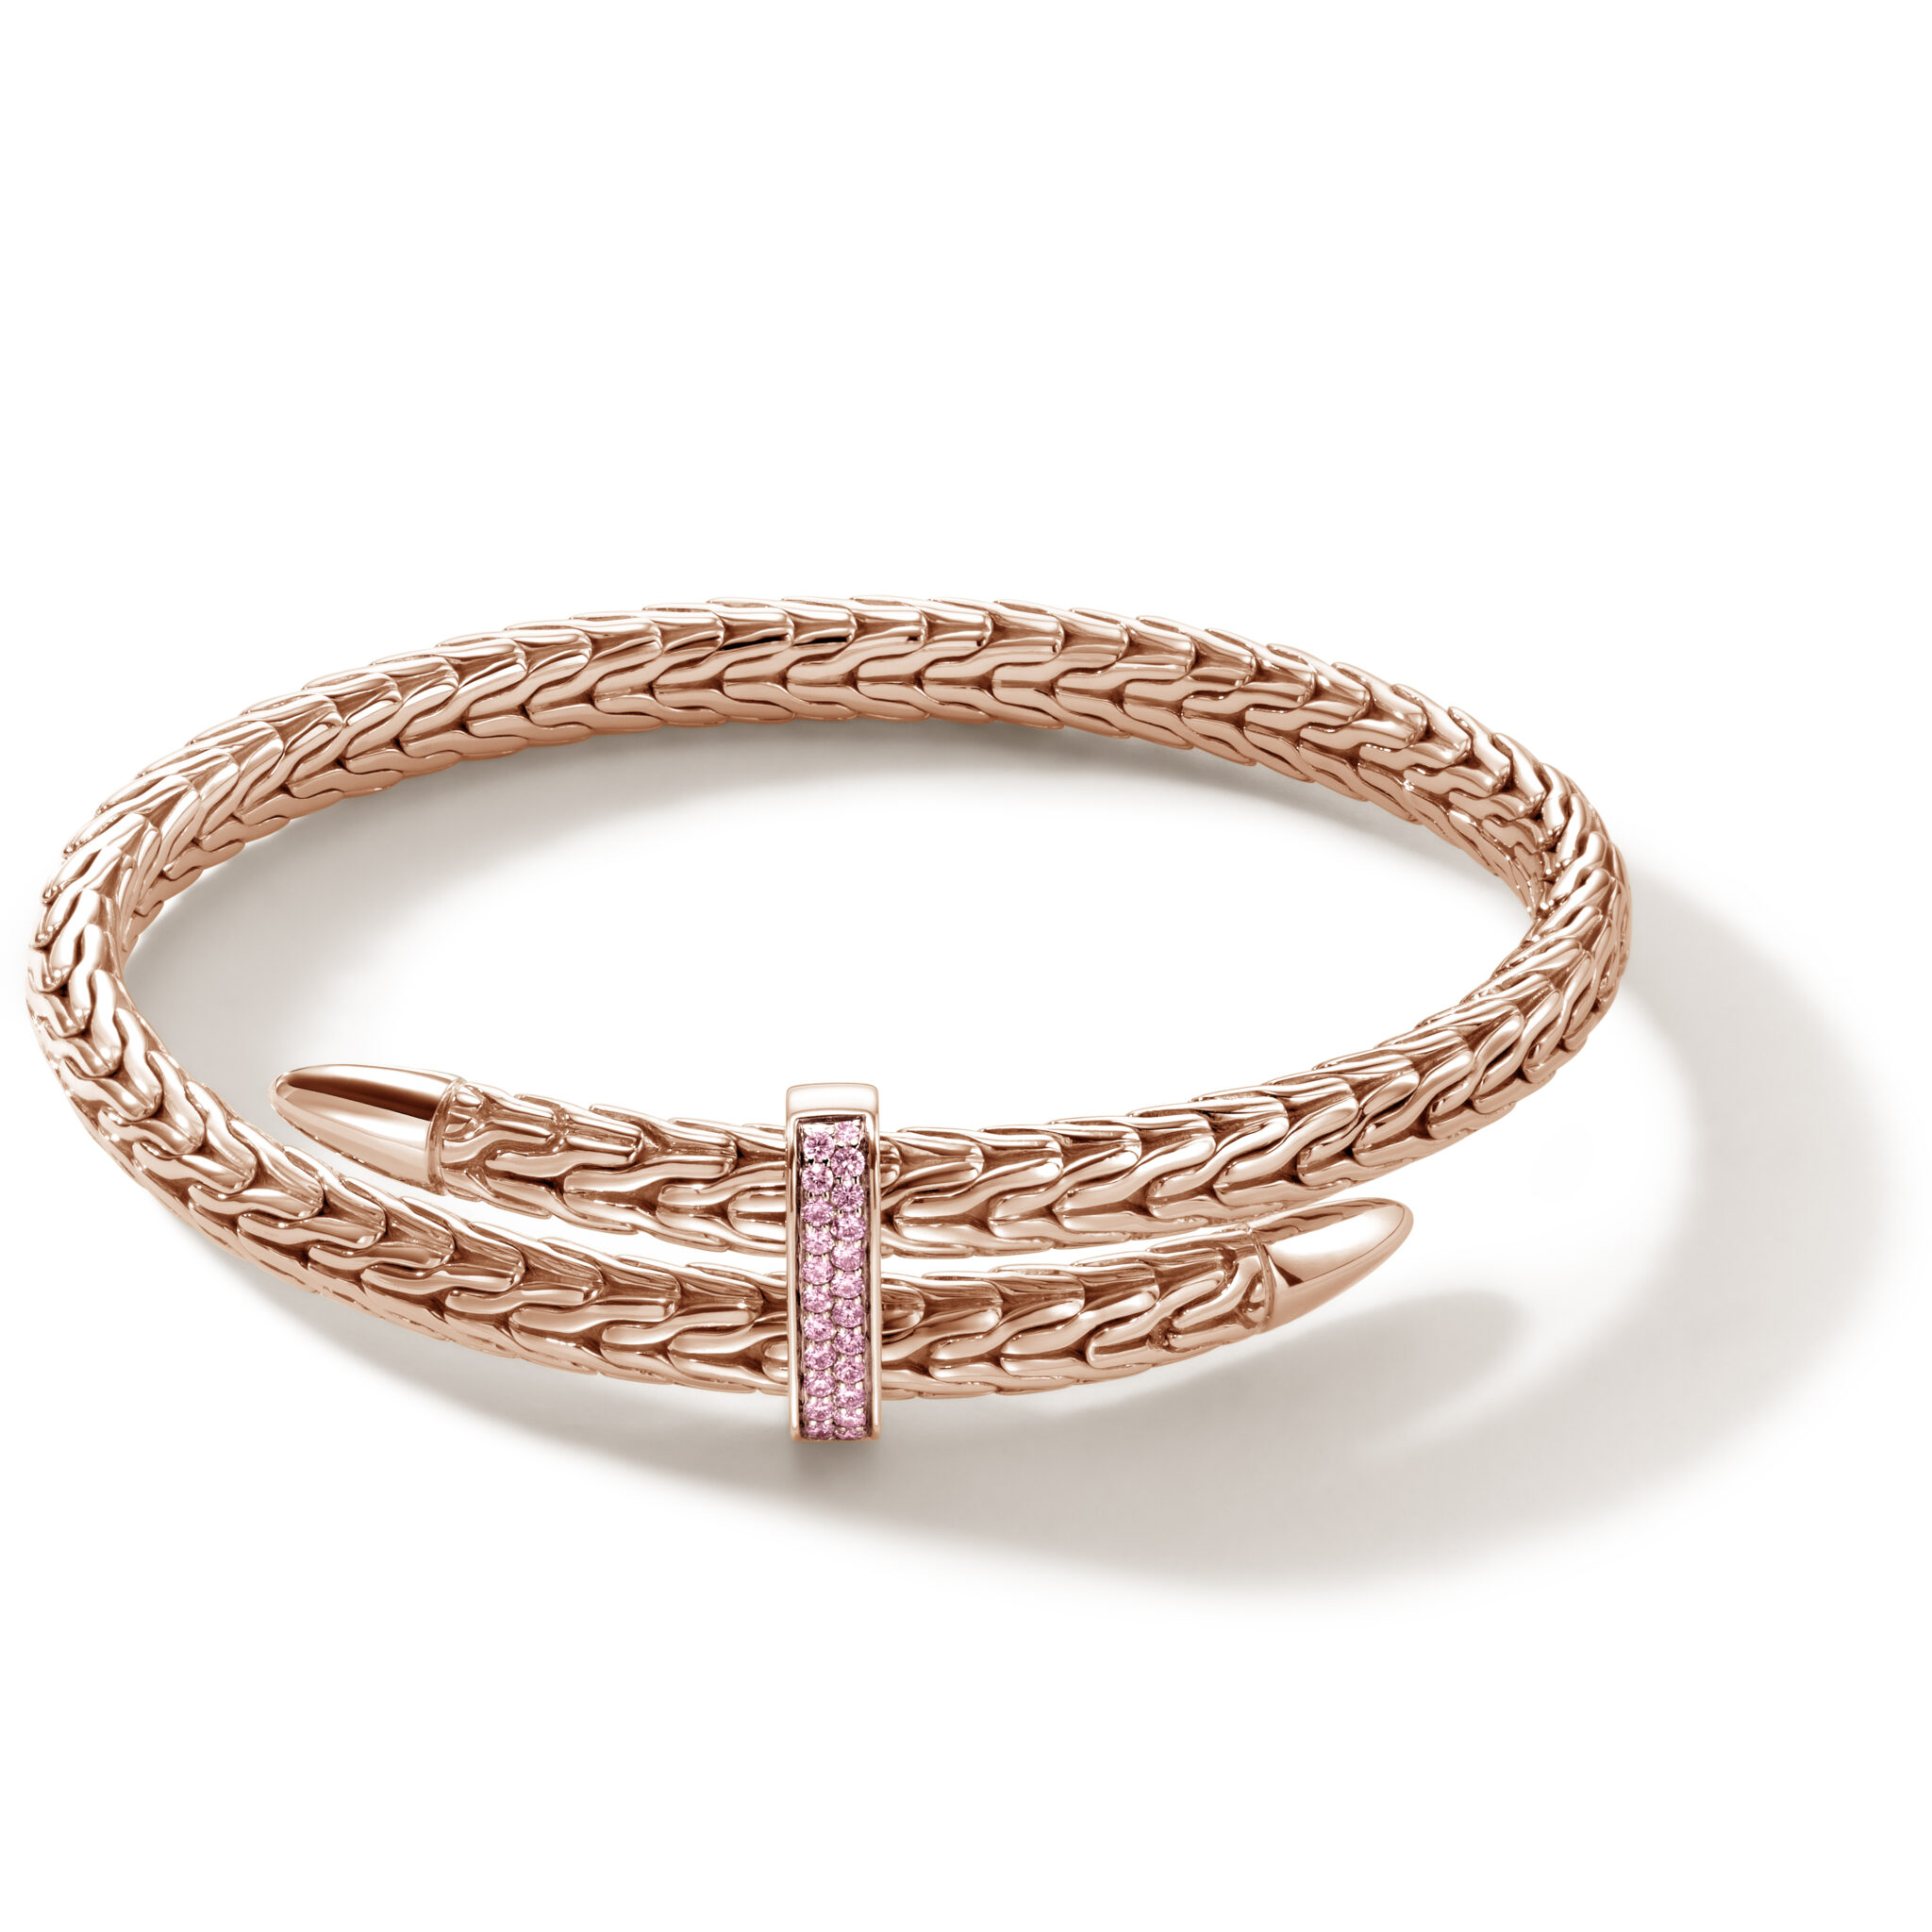 Limited Edition Spear Flex Cuff in Rose Gold with Pink Sapphire